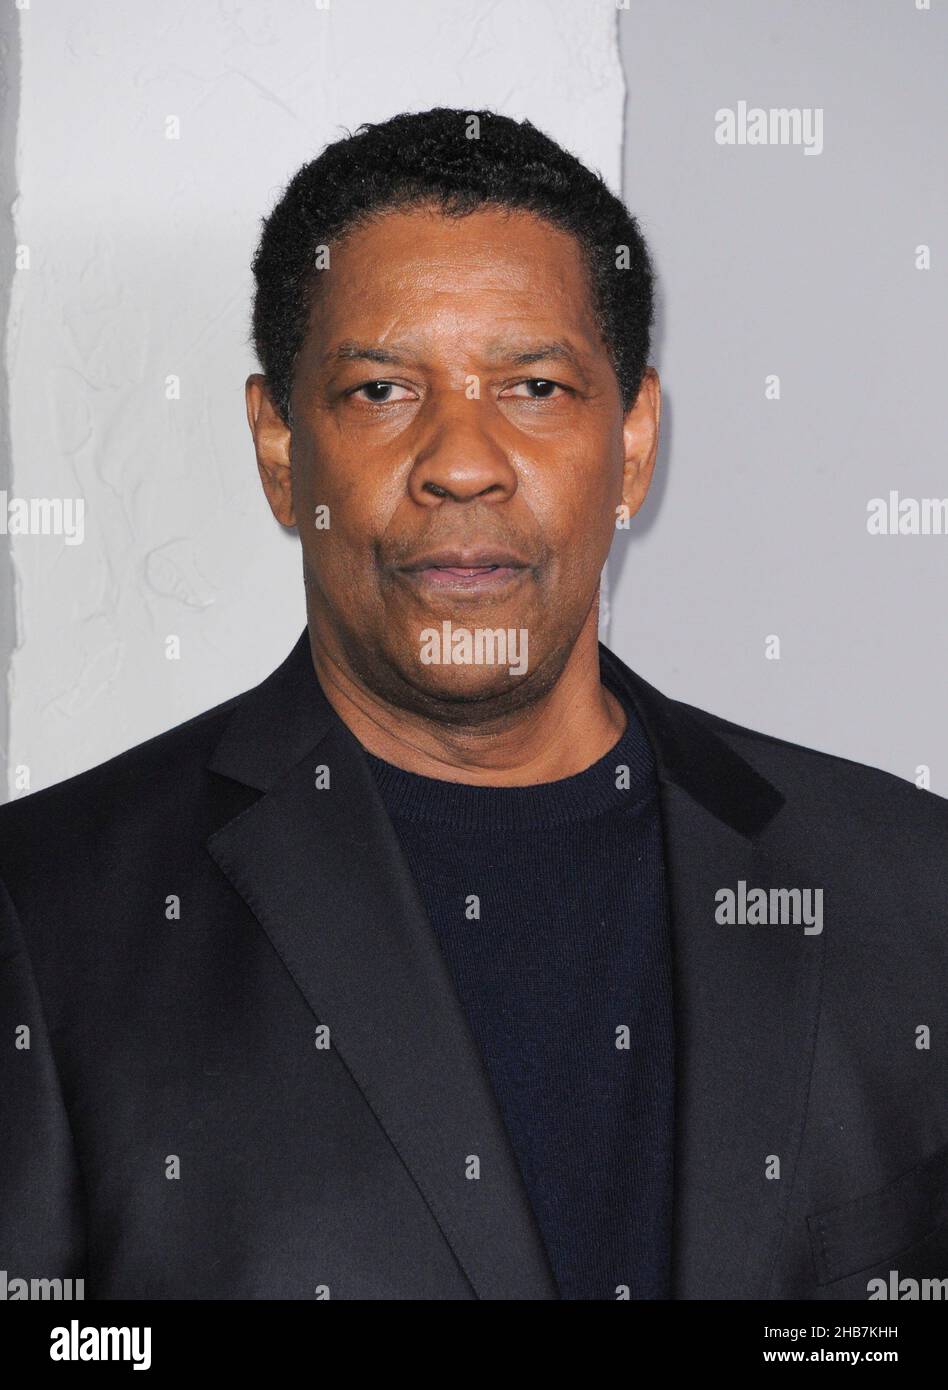 Los Angeles, USA. 16th Dec, 2021. Denzel Washington at arrivals for THE TRAGEDY OF MACBETH Premiere, Directors Guild of America DGA Theater Complex, Los Angeles, CA December 16, 2021. Credit: Elizabeth Goodenough/Everett Collection/Alamy Live News Stock Photo